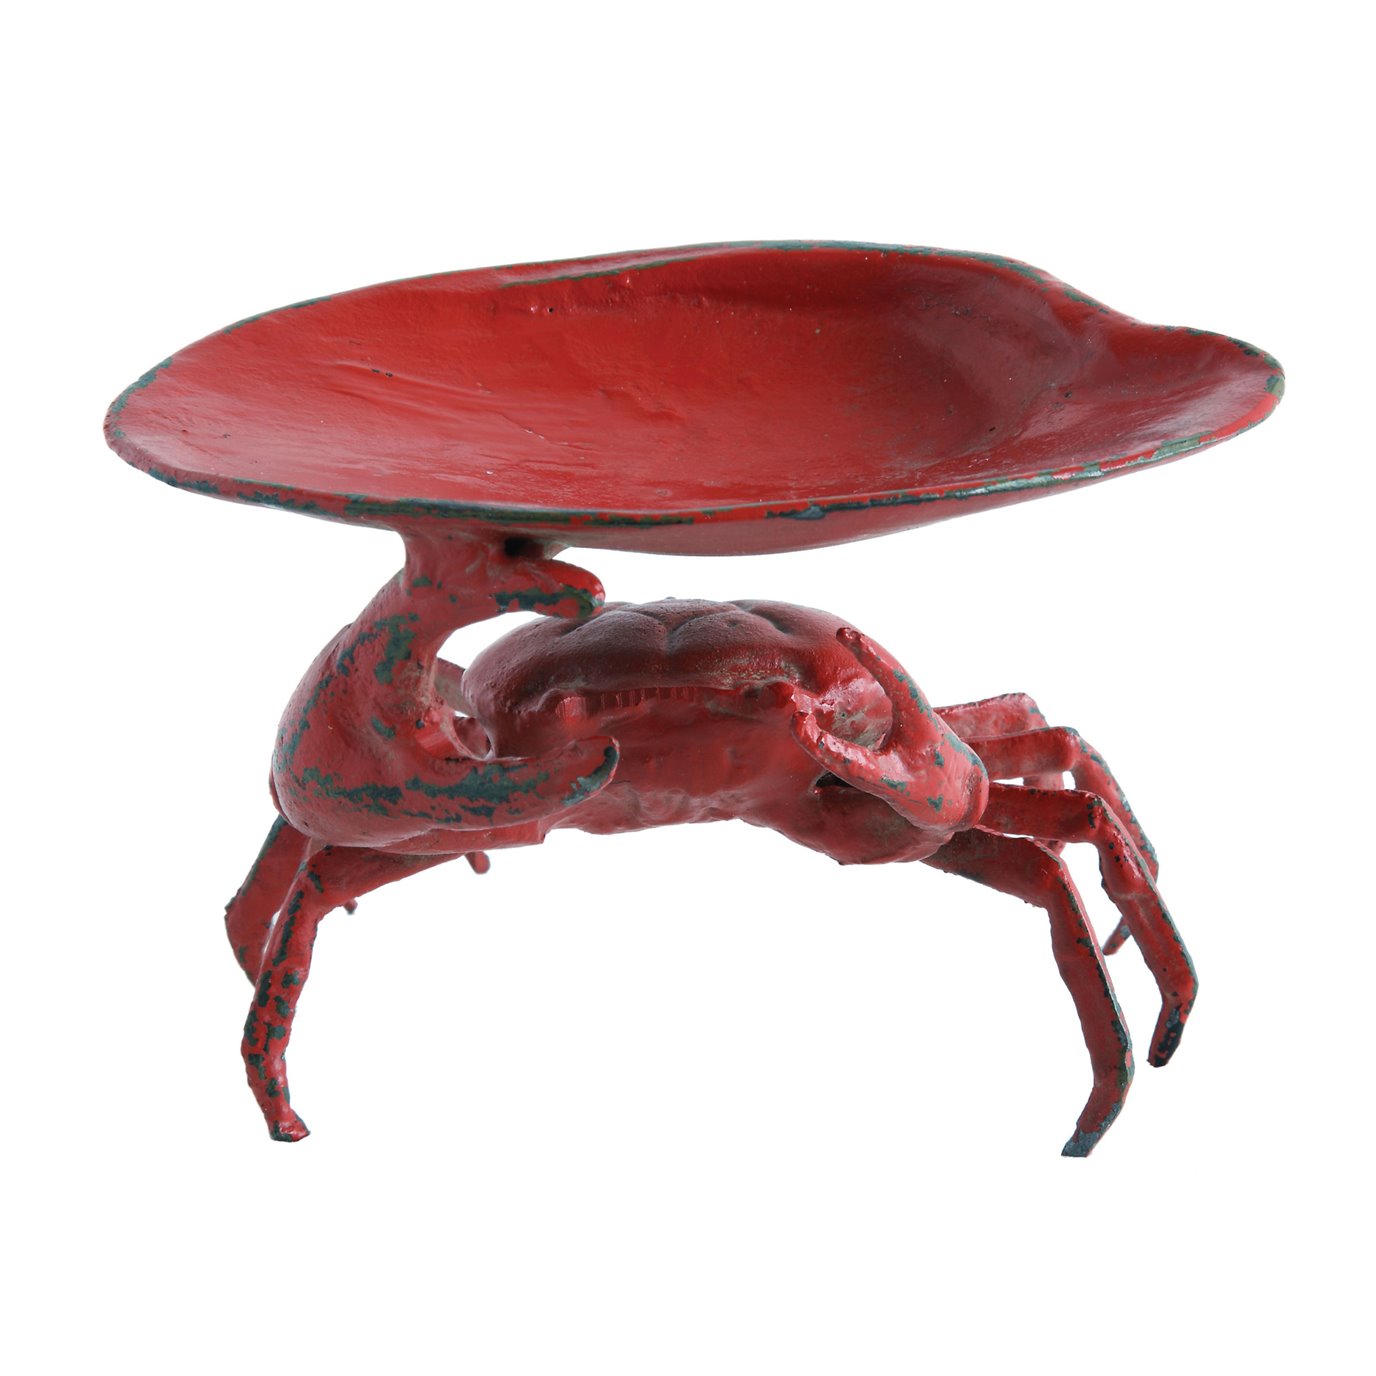 Distressed Red Decorative Cast Iron Crab Shaped Dish